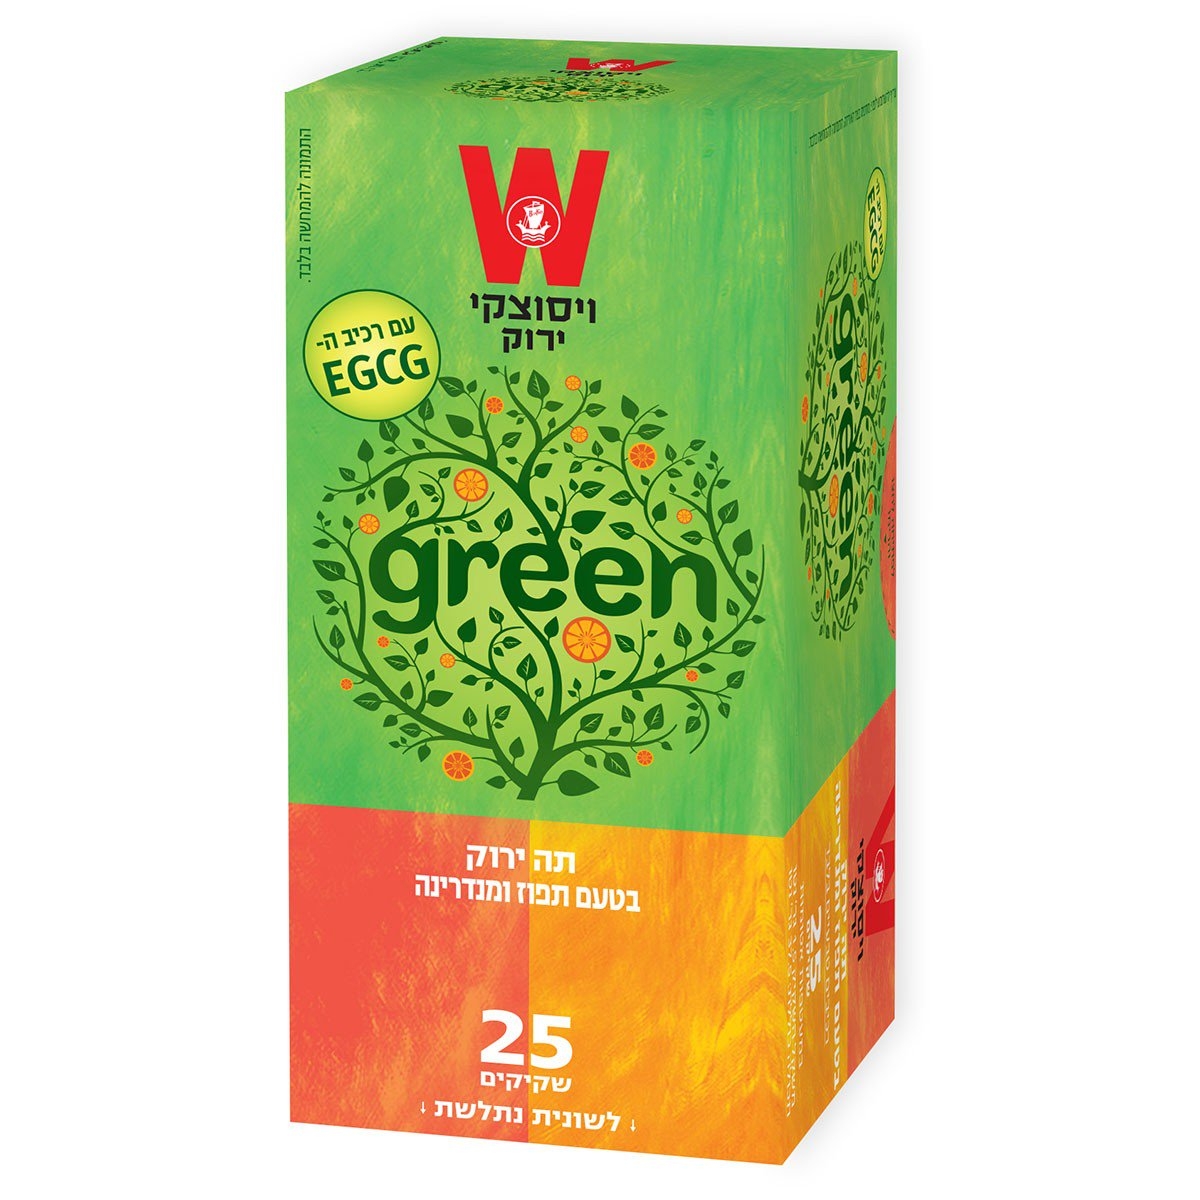 Green Tea with Citrus Fruits From Wissotzky - 1